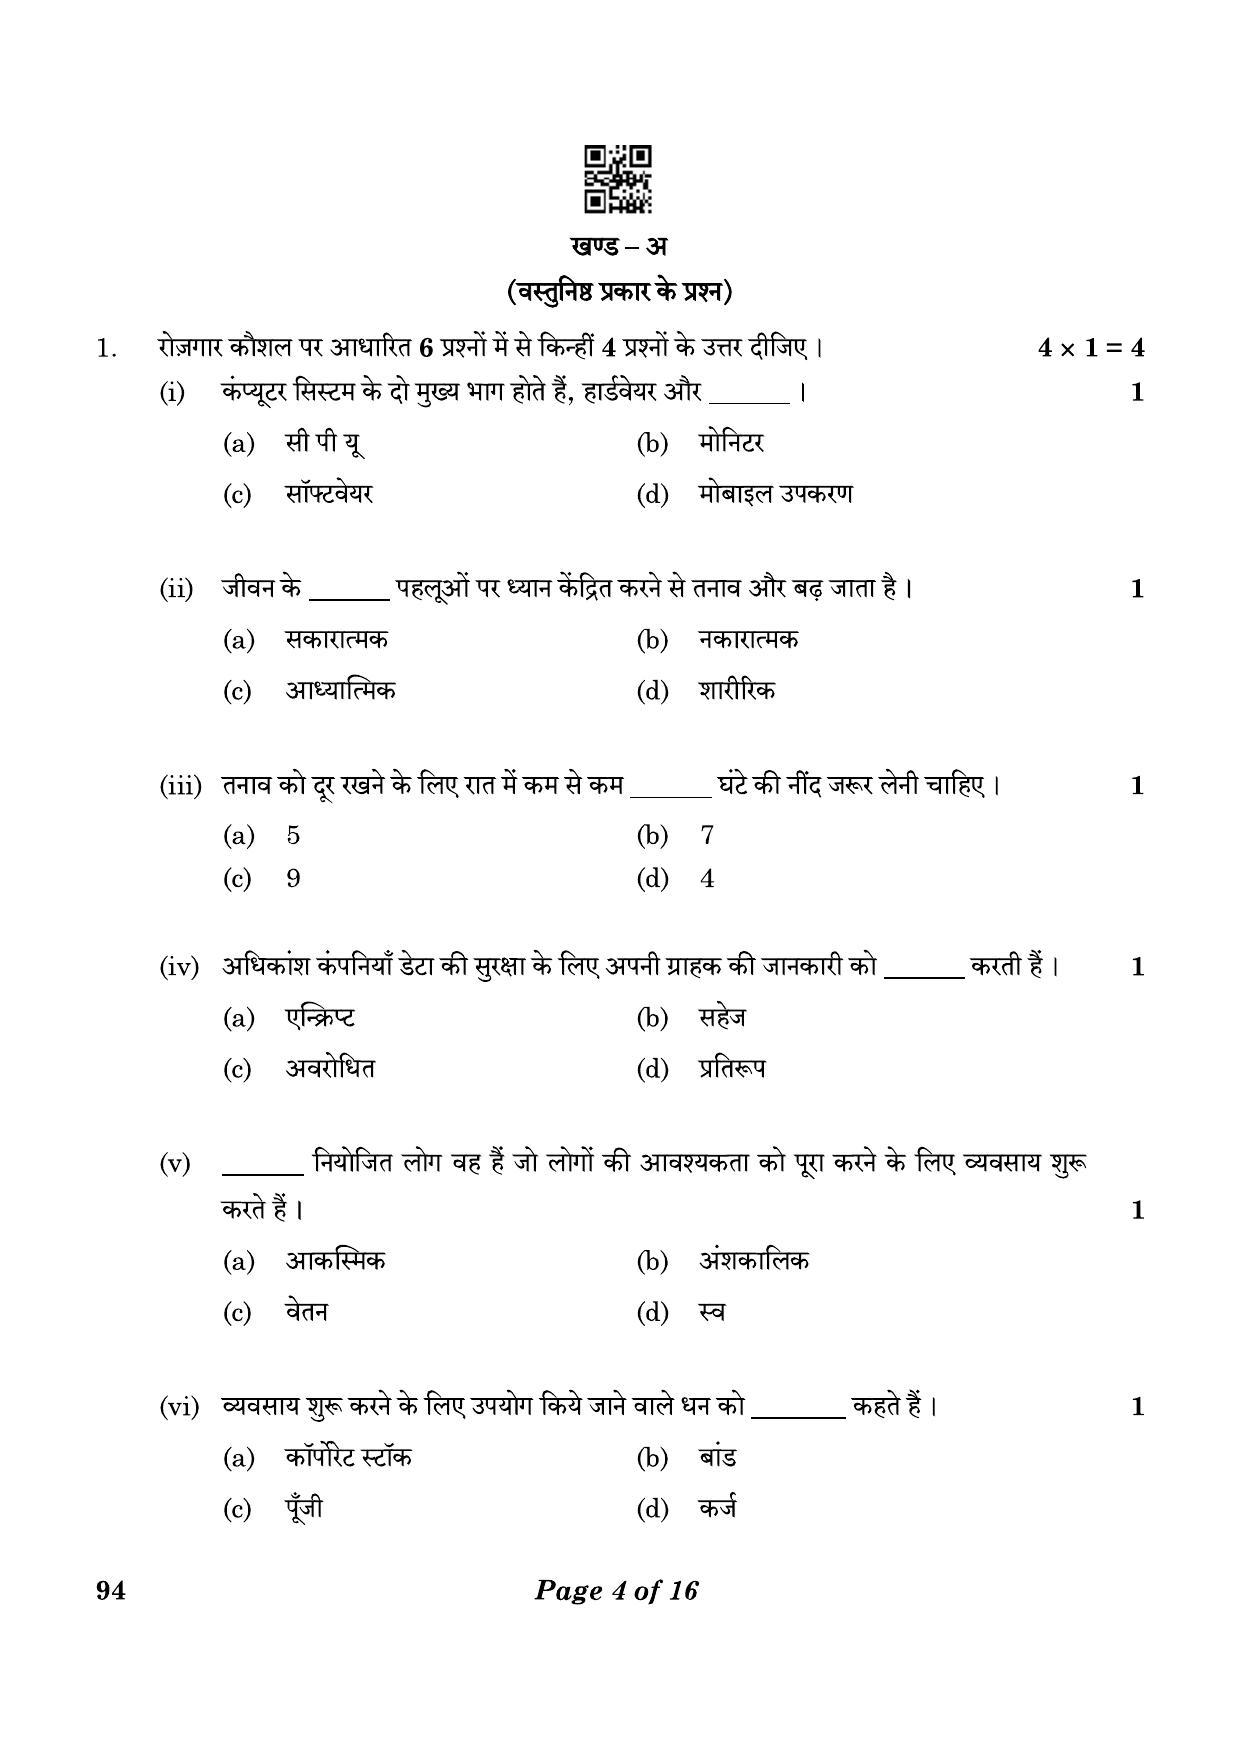 CBSE Class 10 94 Beauty And Wellness 2023 Question Paper - Page 4